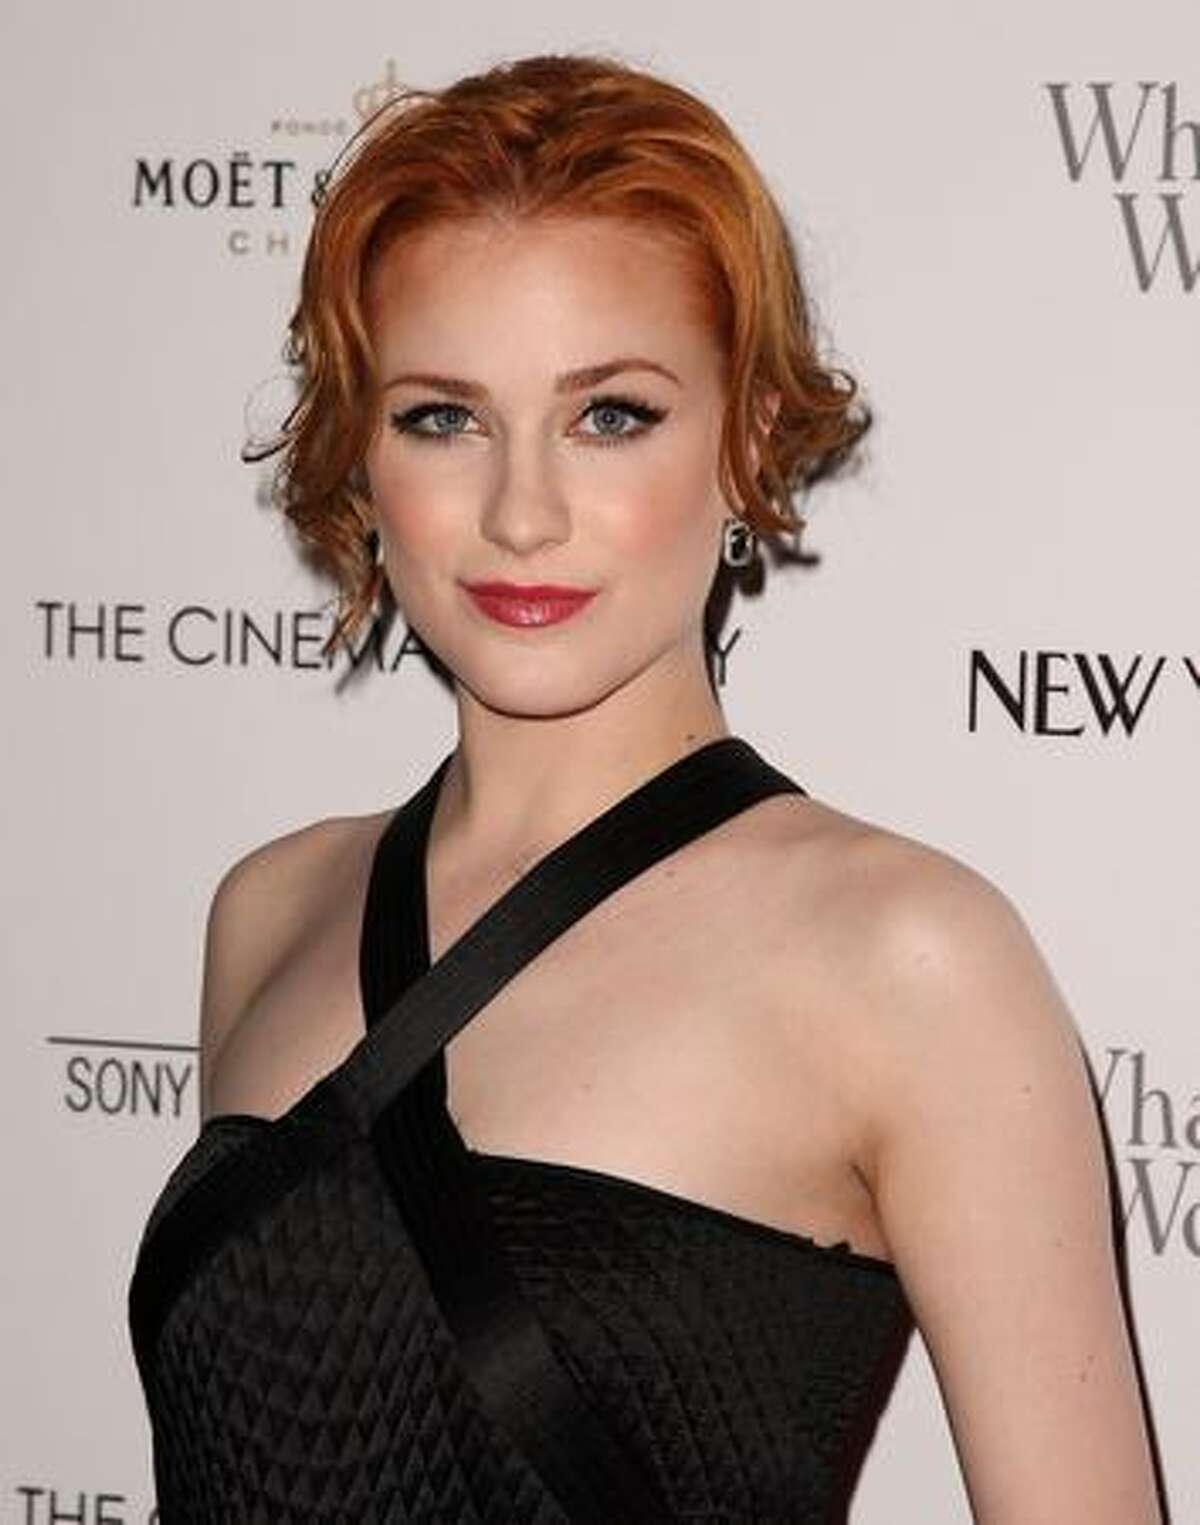 Actress Evan Rachel Wood attends a screening of "Whatever Works" hosted by the Cinema Society and The New Yorker at Regal Cinema Battery Park in New York City.